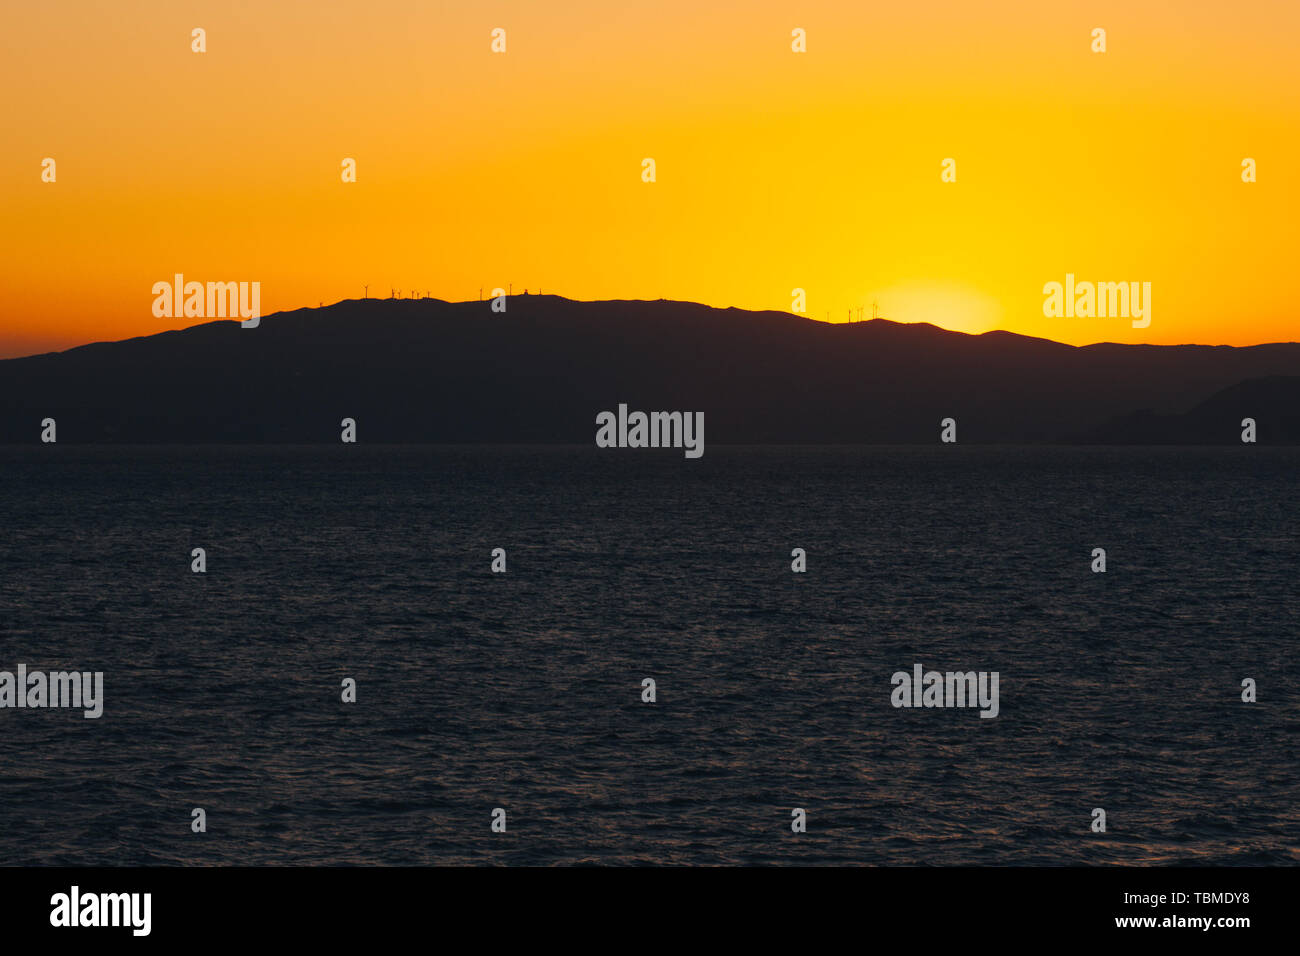 Sun setting behind the profile of an island carpeted with wind turbines Stock Photo